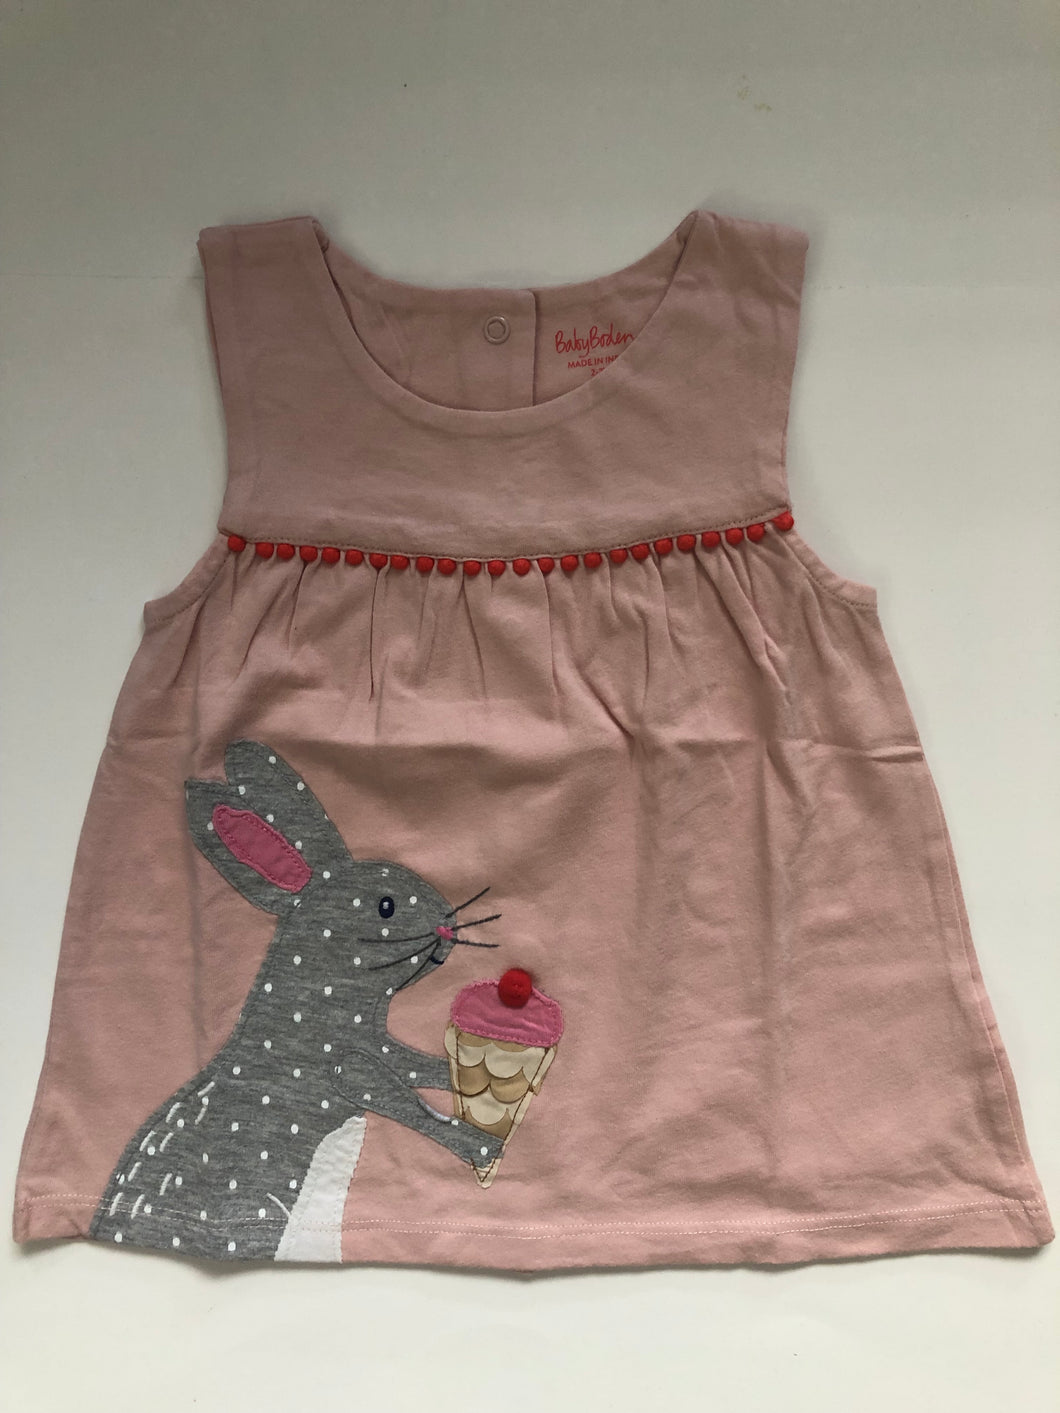 NWOT Baby Boden Applique Jersey Play Set Top Only